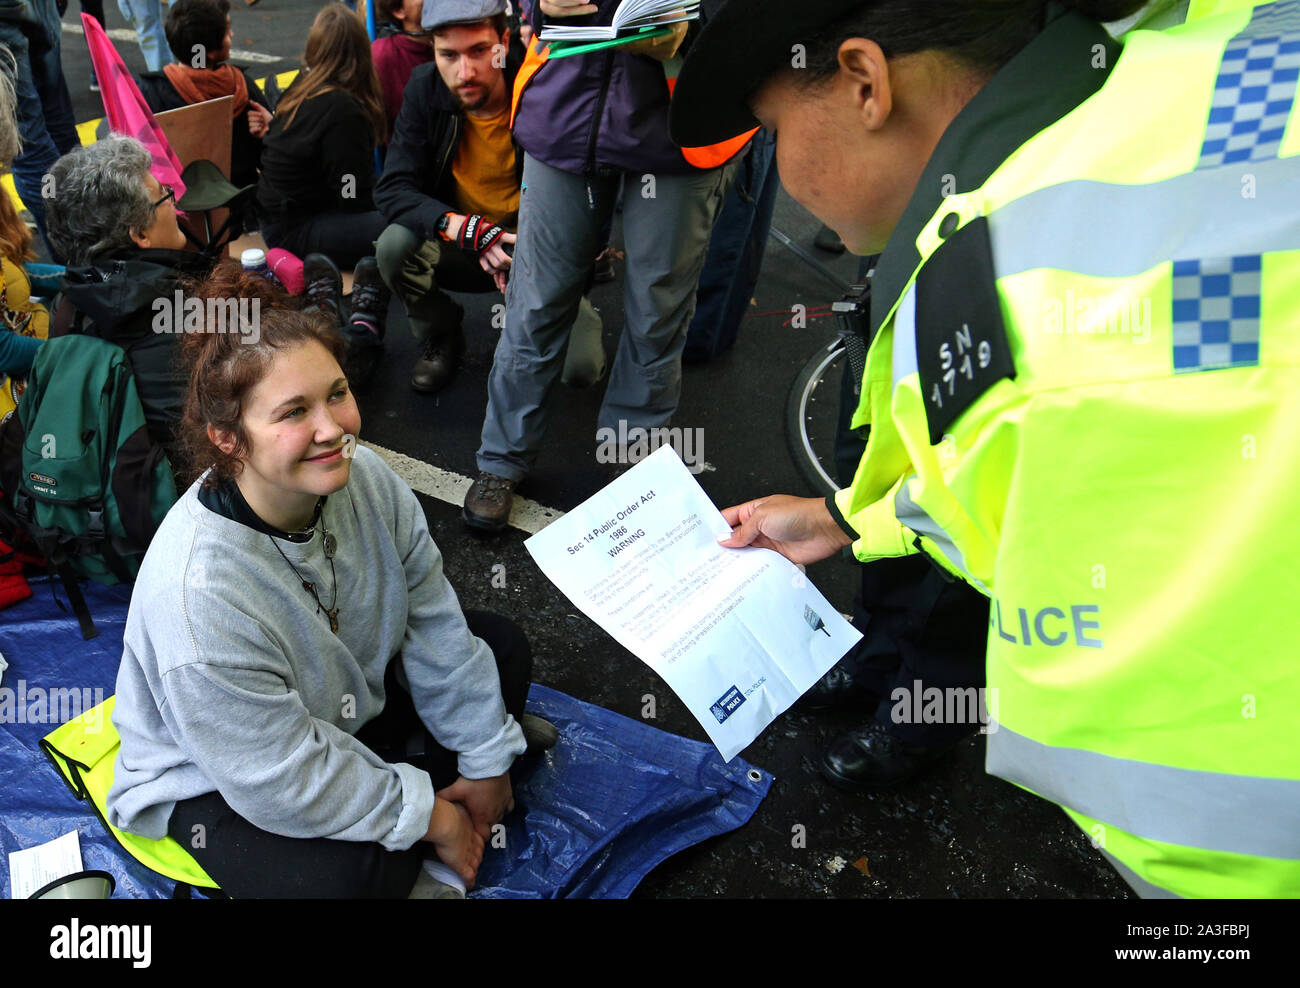 A protester being read Section 14 of the Public Order Act by the police, at Millbank near to the junction with Great College Street, during an Extinction Rebellion (XR) protest in Westminster, London. Stock Photo